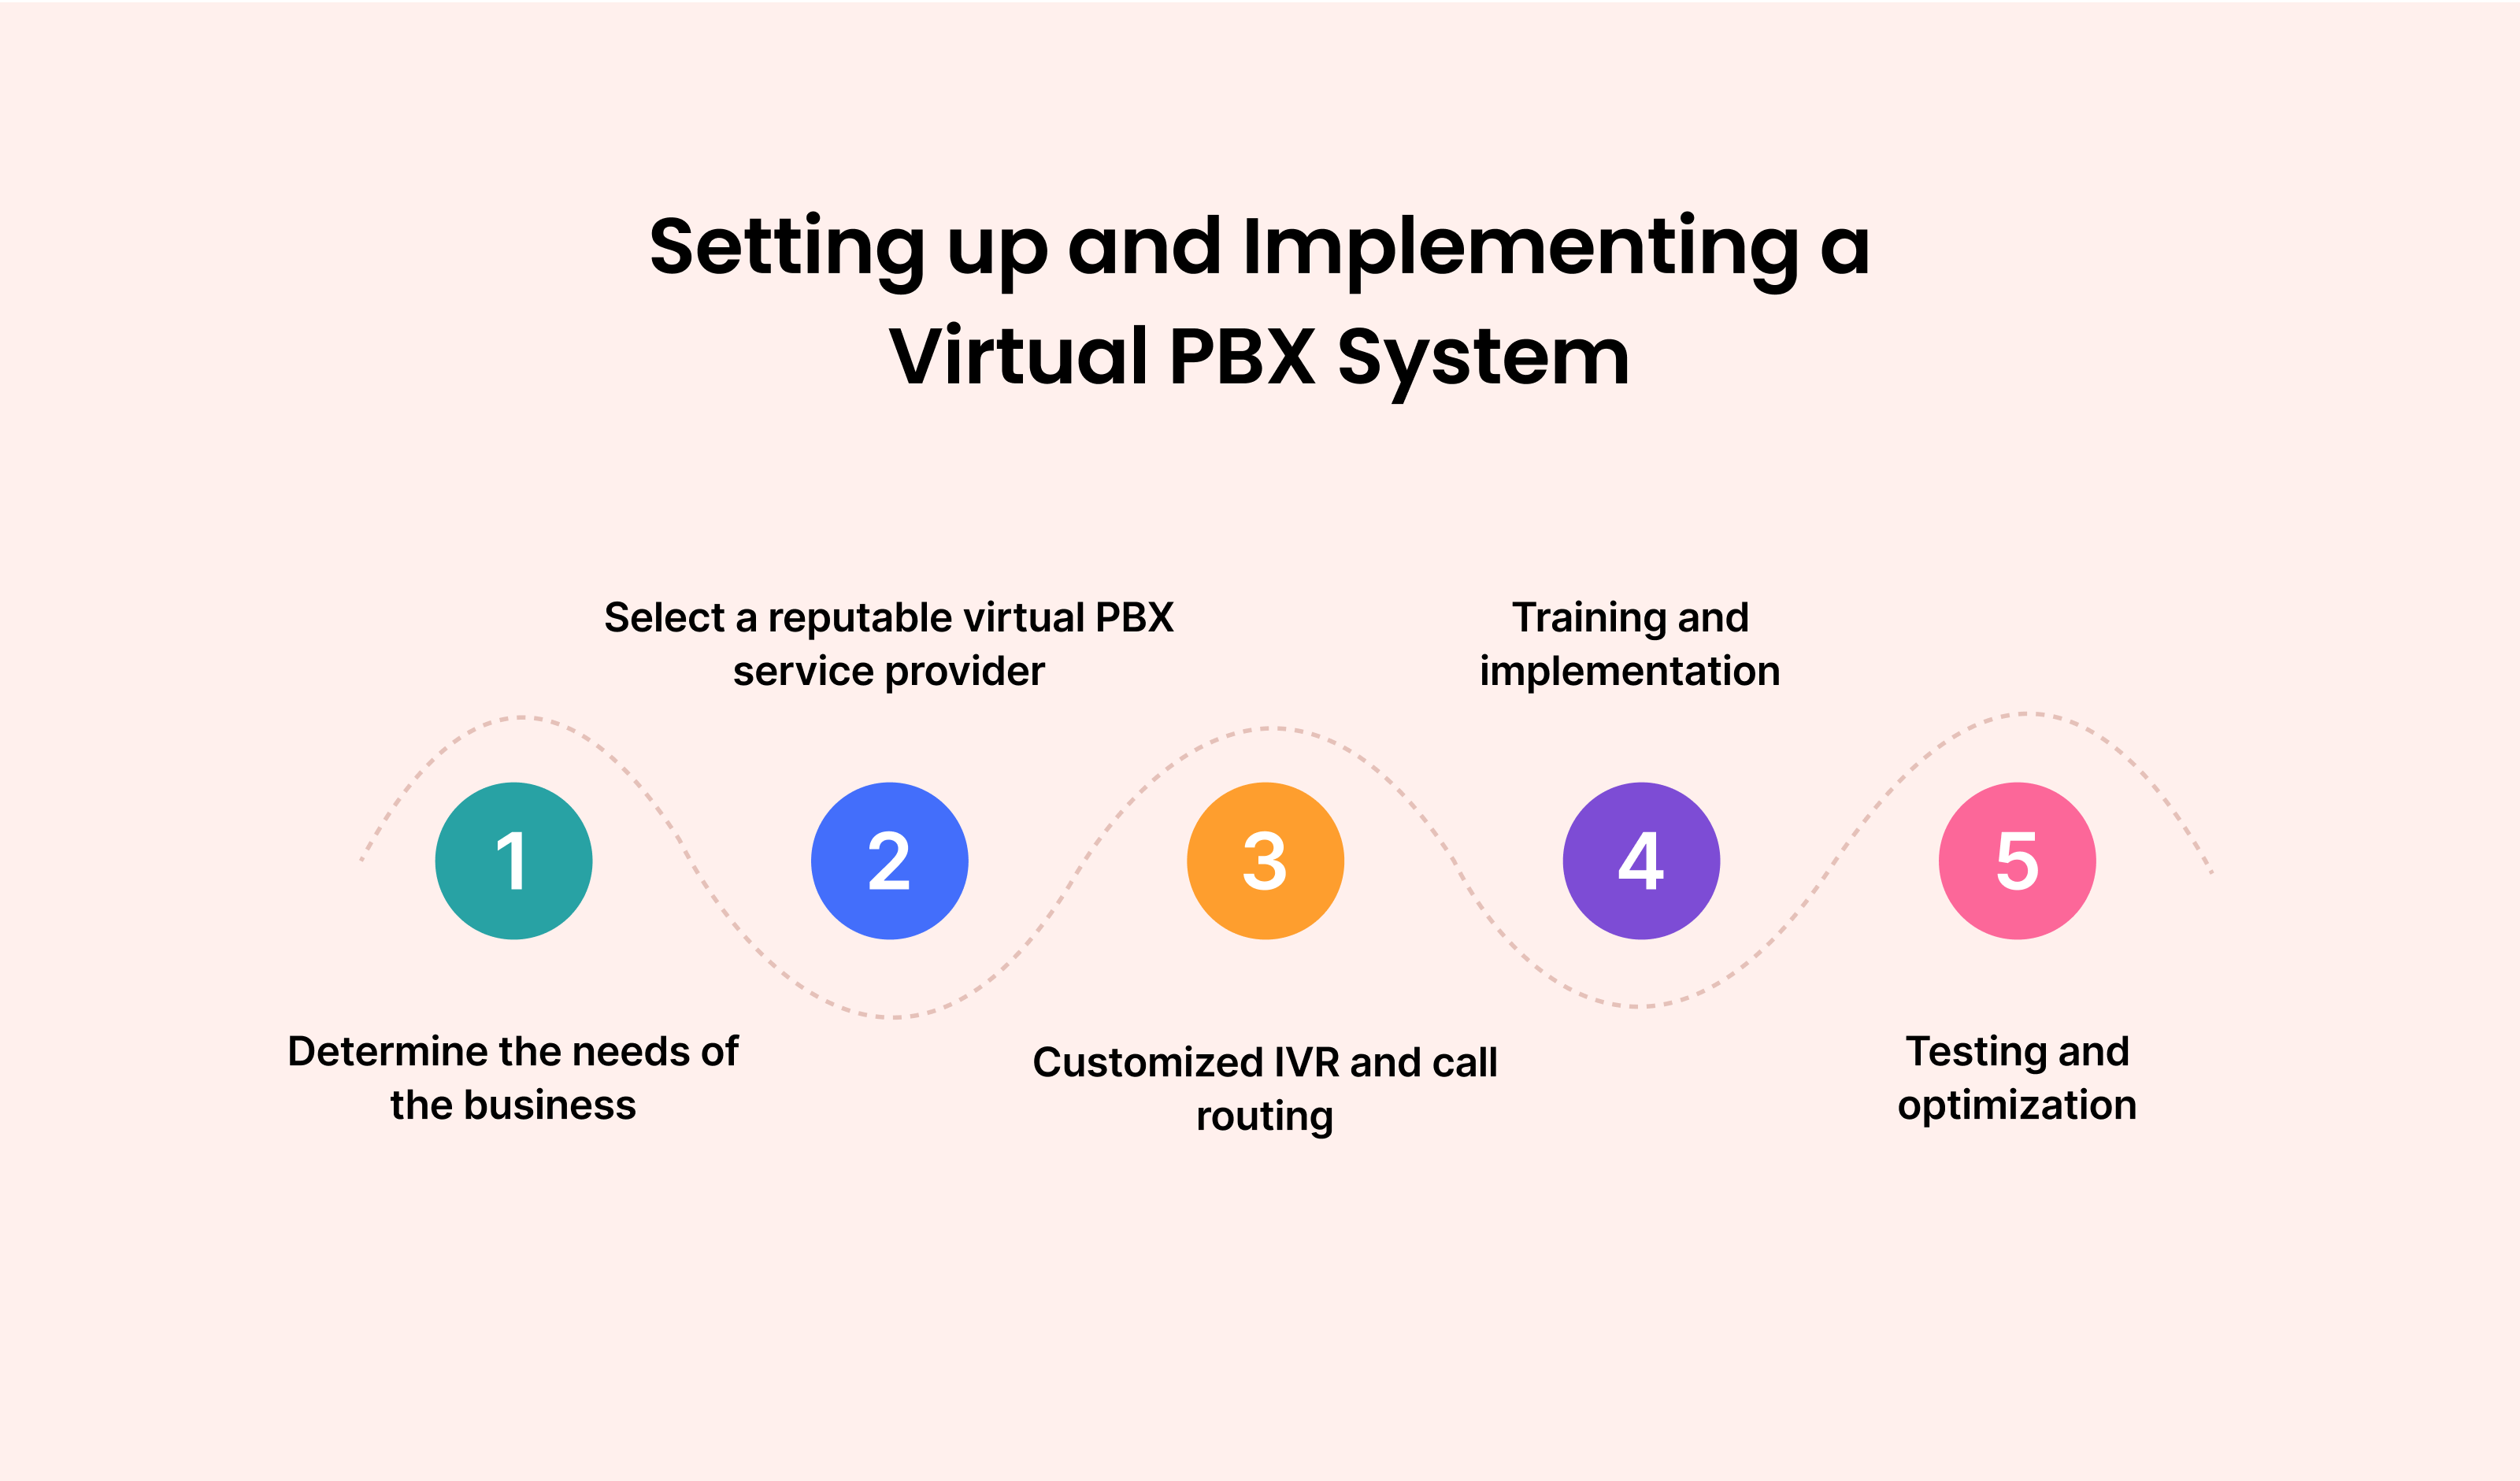 Setting up and Implementing a Virtual PBX System: